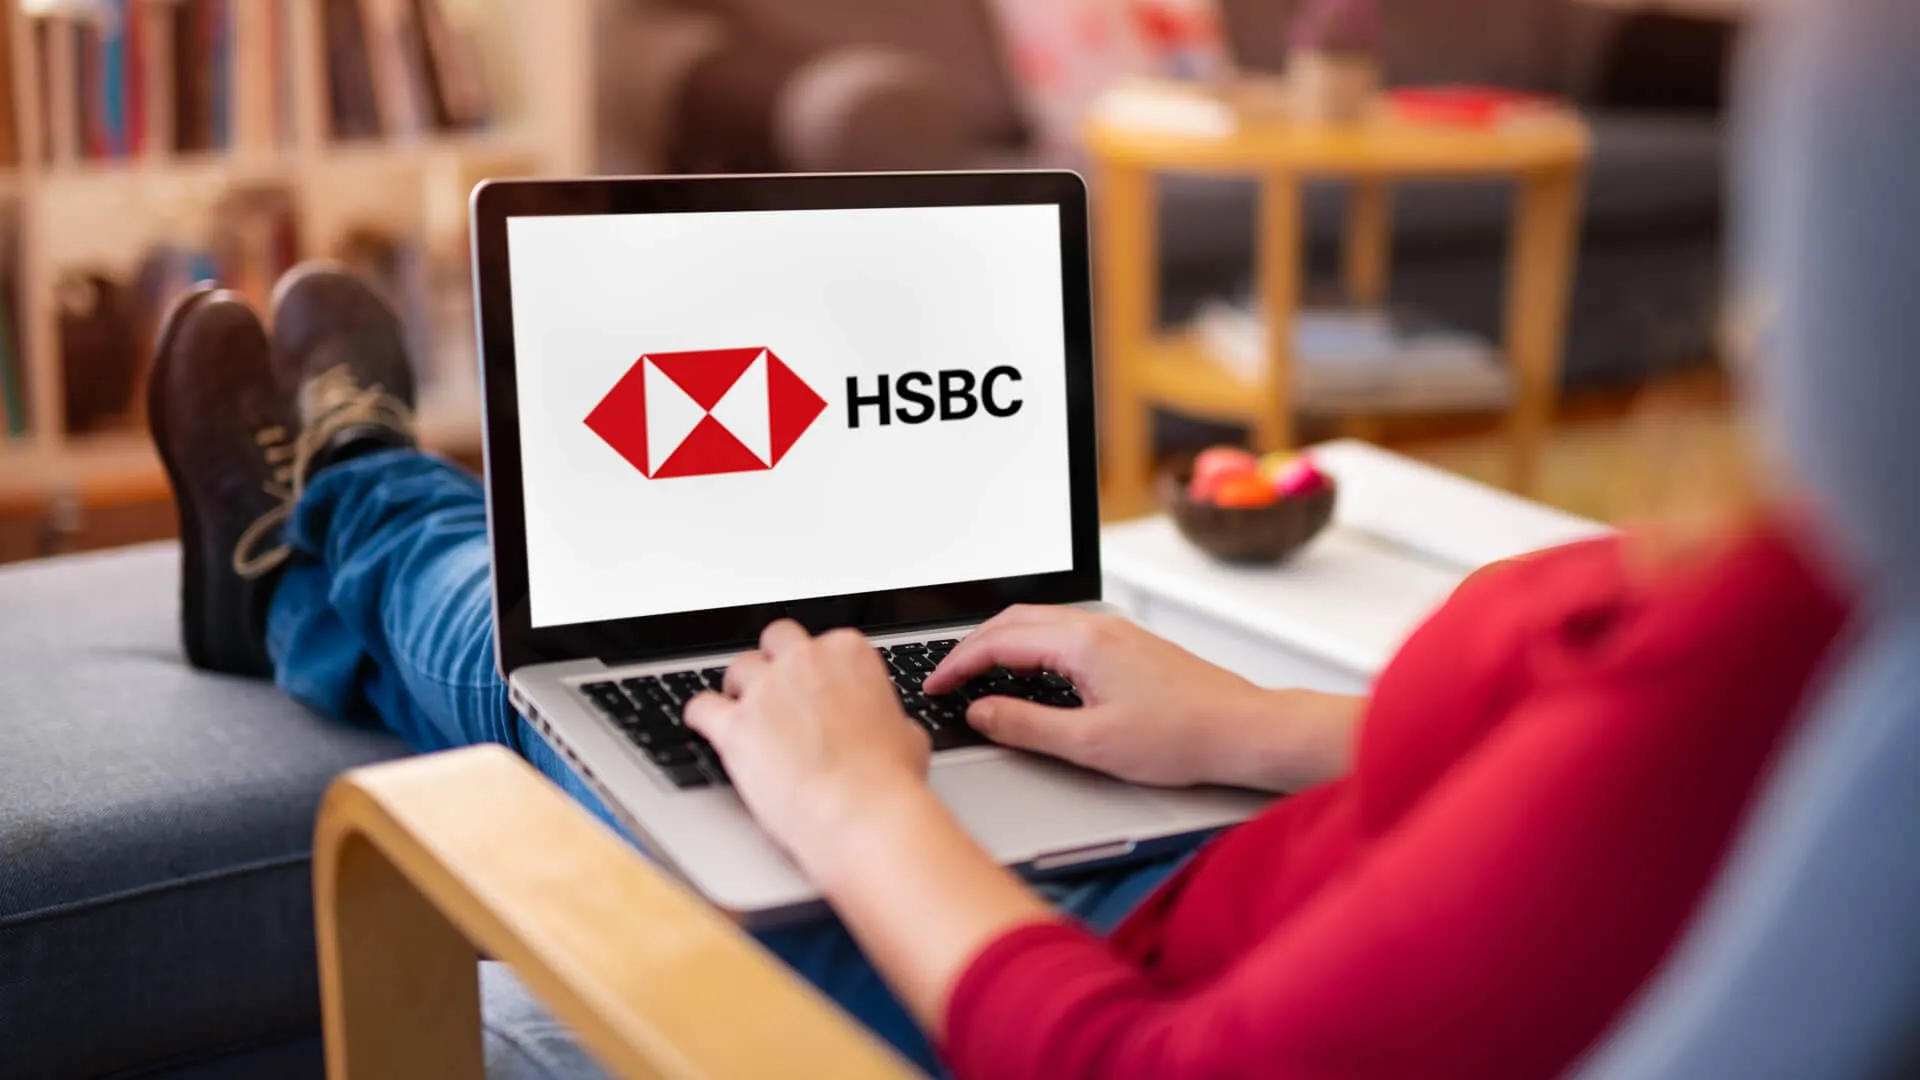 How To Find and Use Your HSBC Login